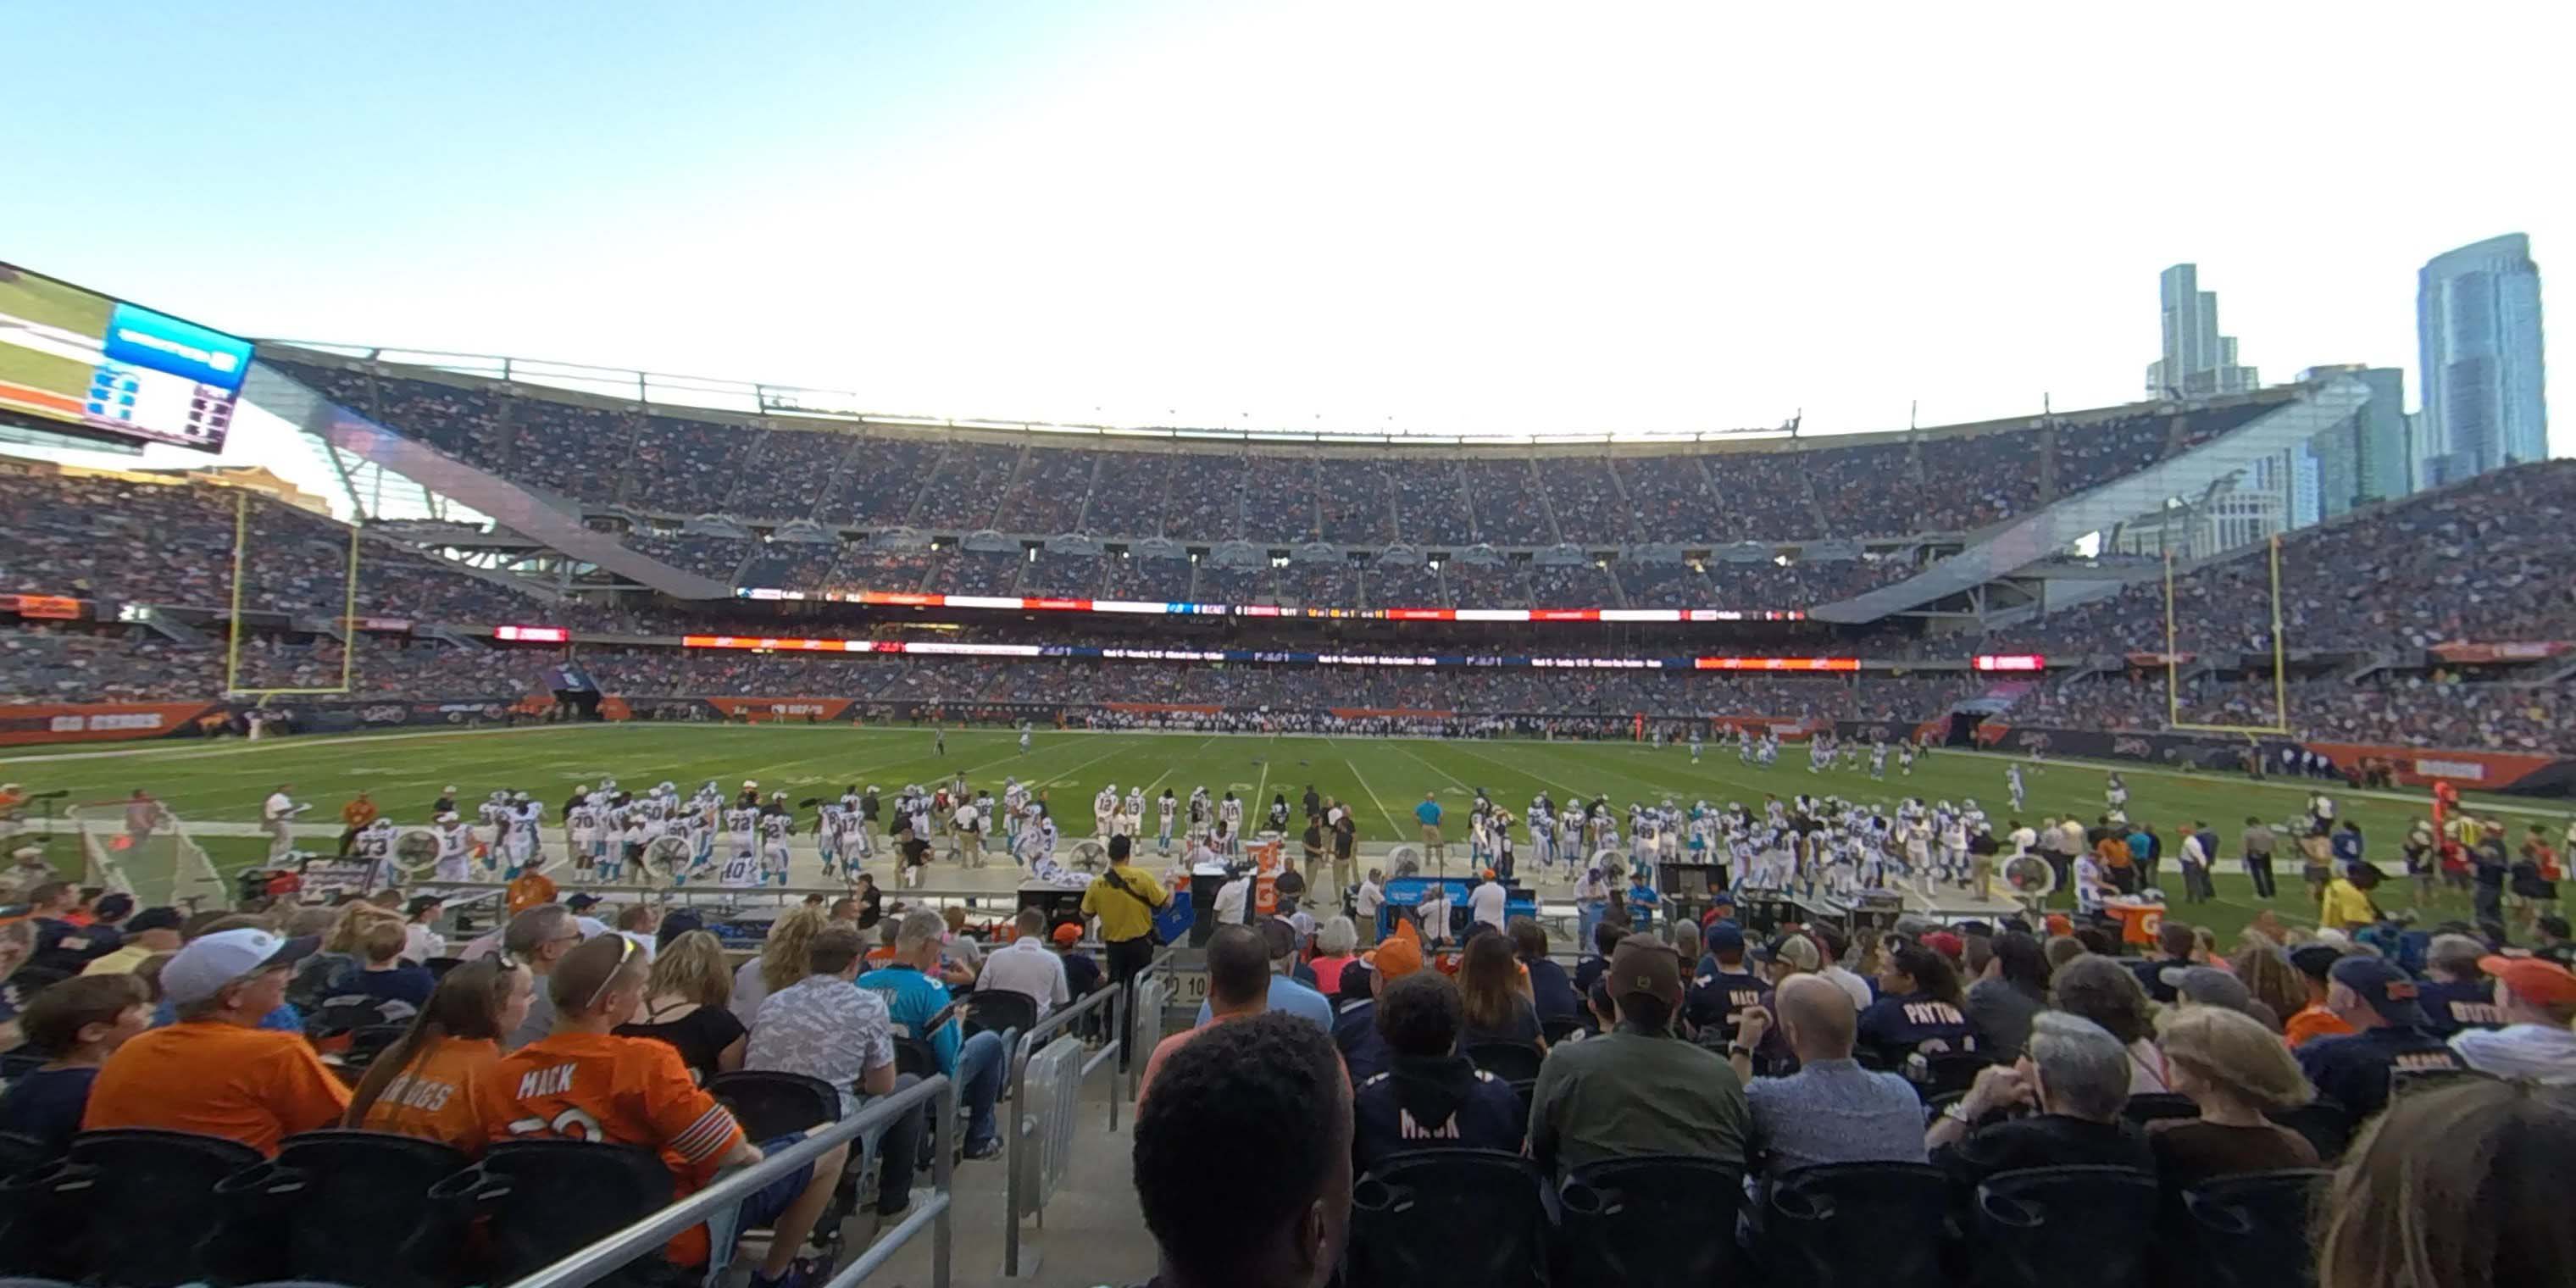 section 108 panoramic seat view  for football - soldier field